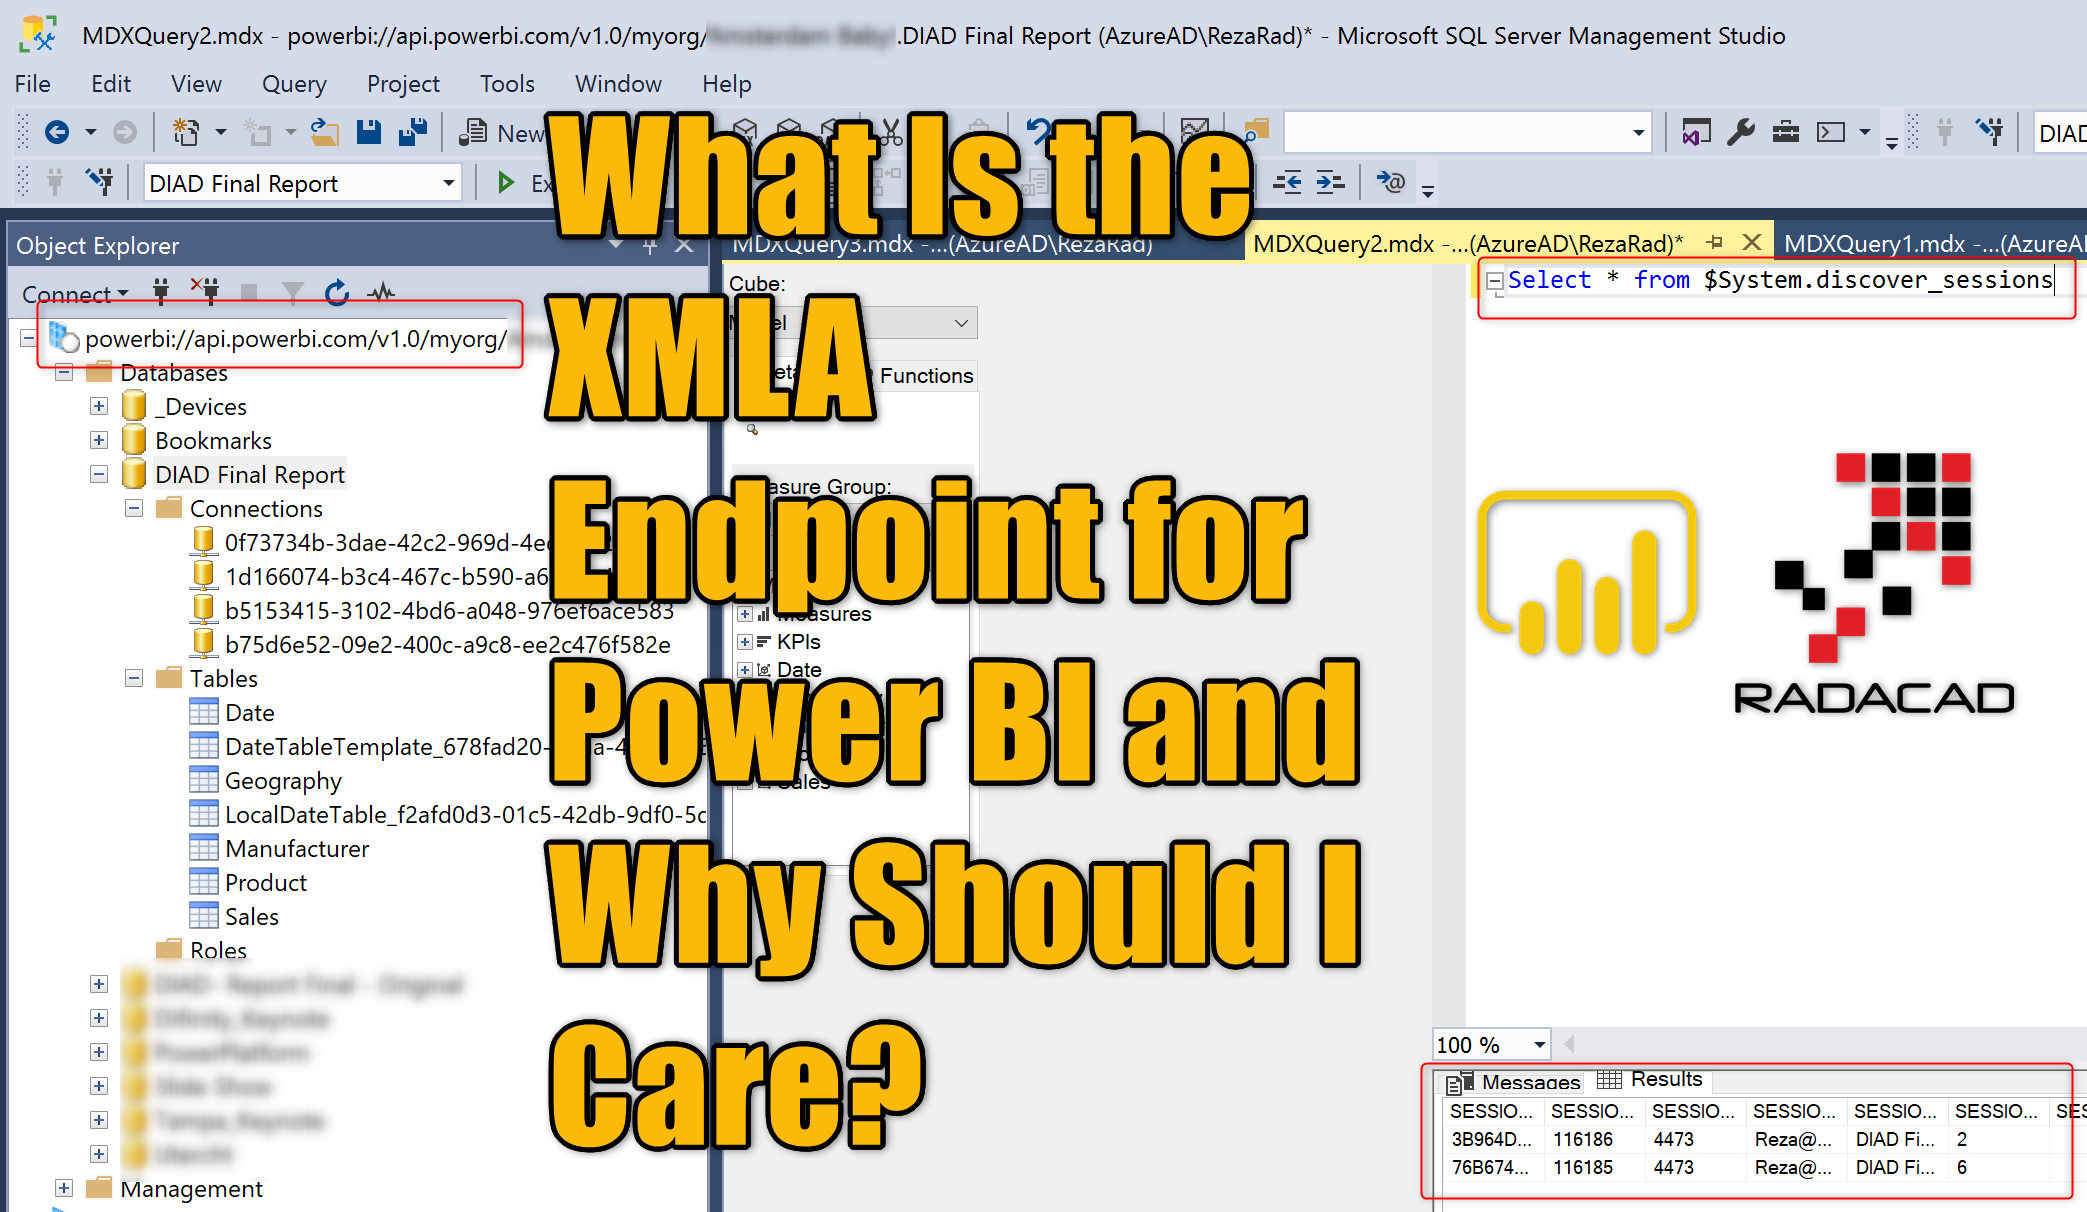 What Is the XMLA Endpoint for Power BI and Why Should I Care?